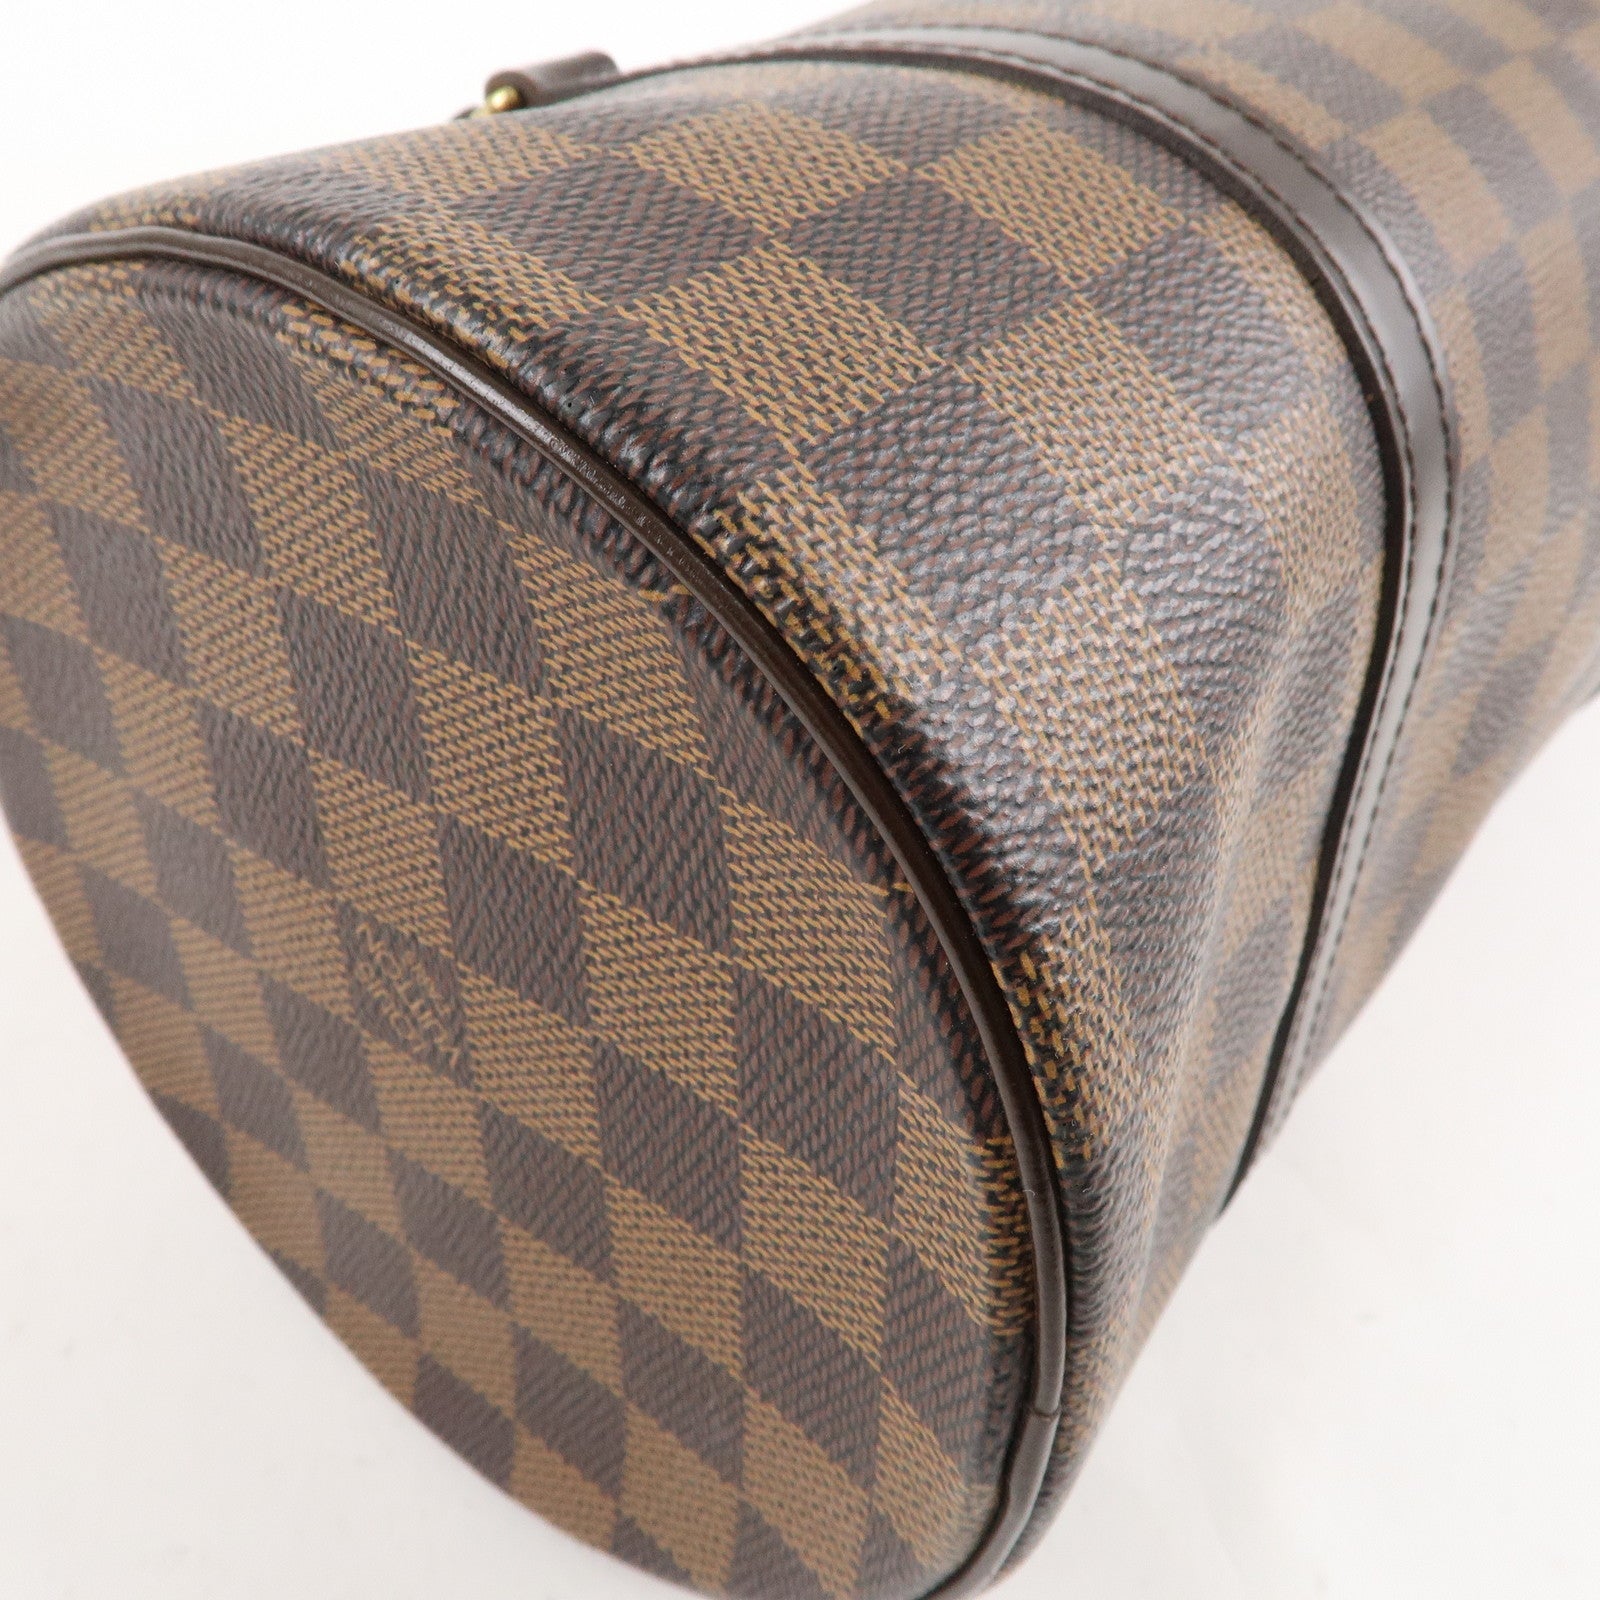 Buy Pre-owned & Brand new Luxury Louis Vuitton Papillon 30 Damier